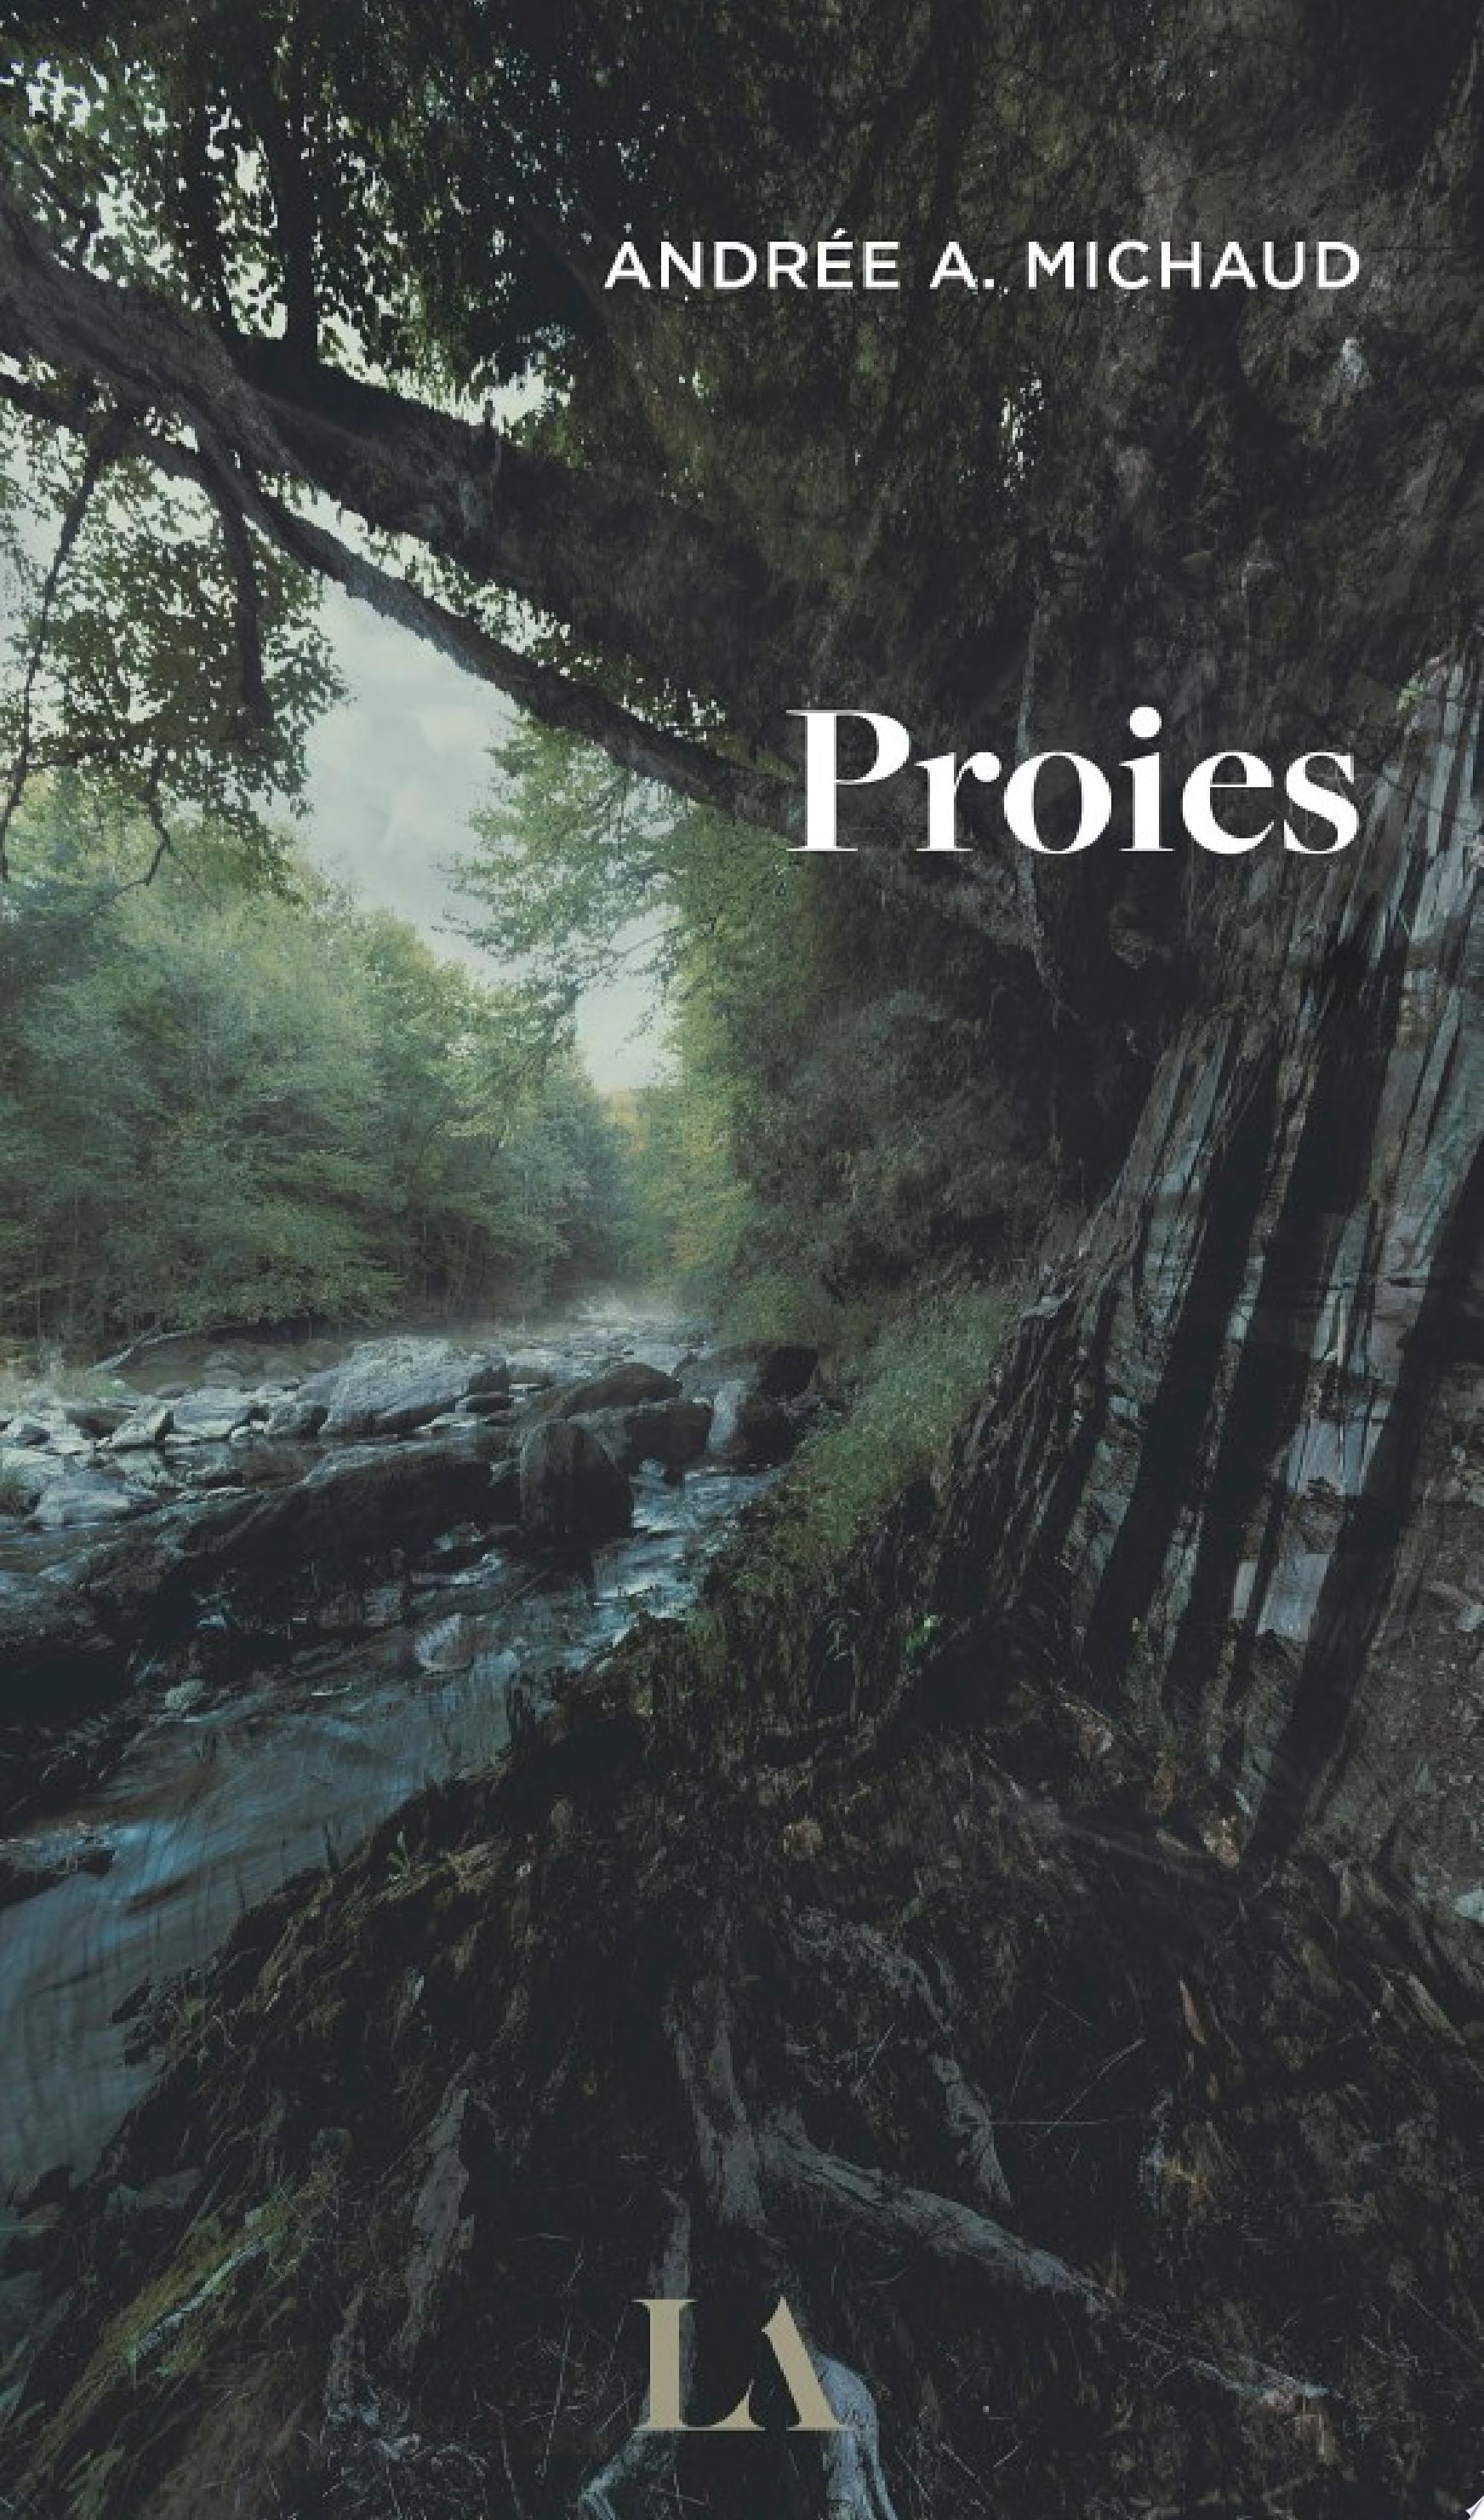 Image for "Proies"